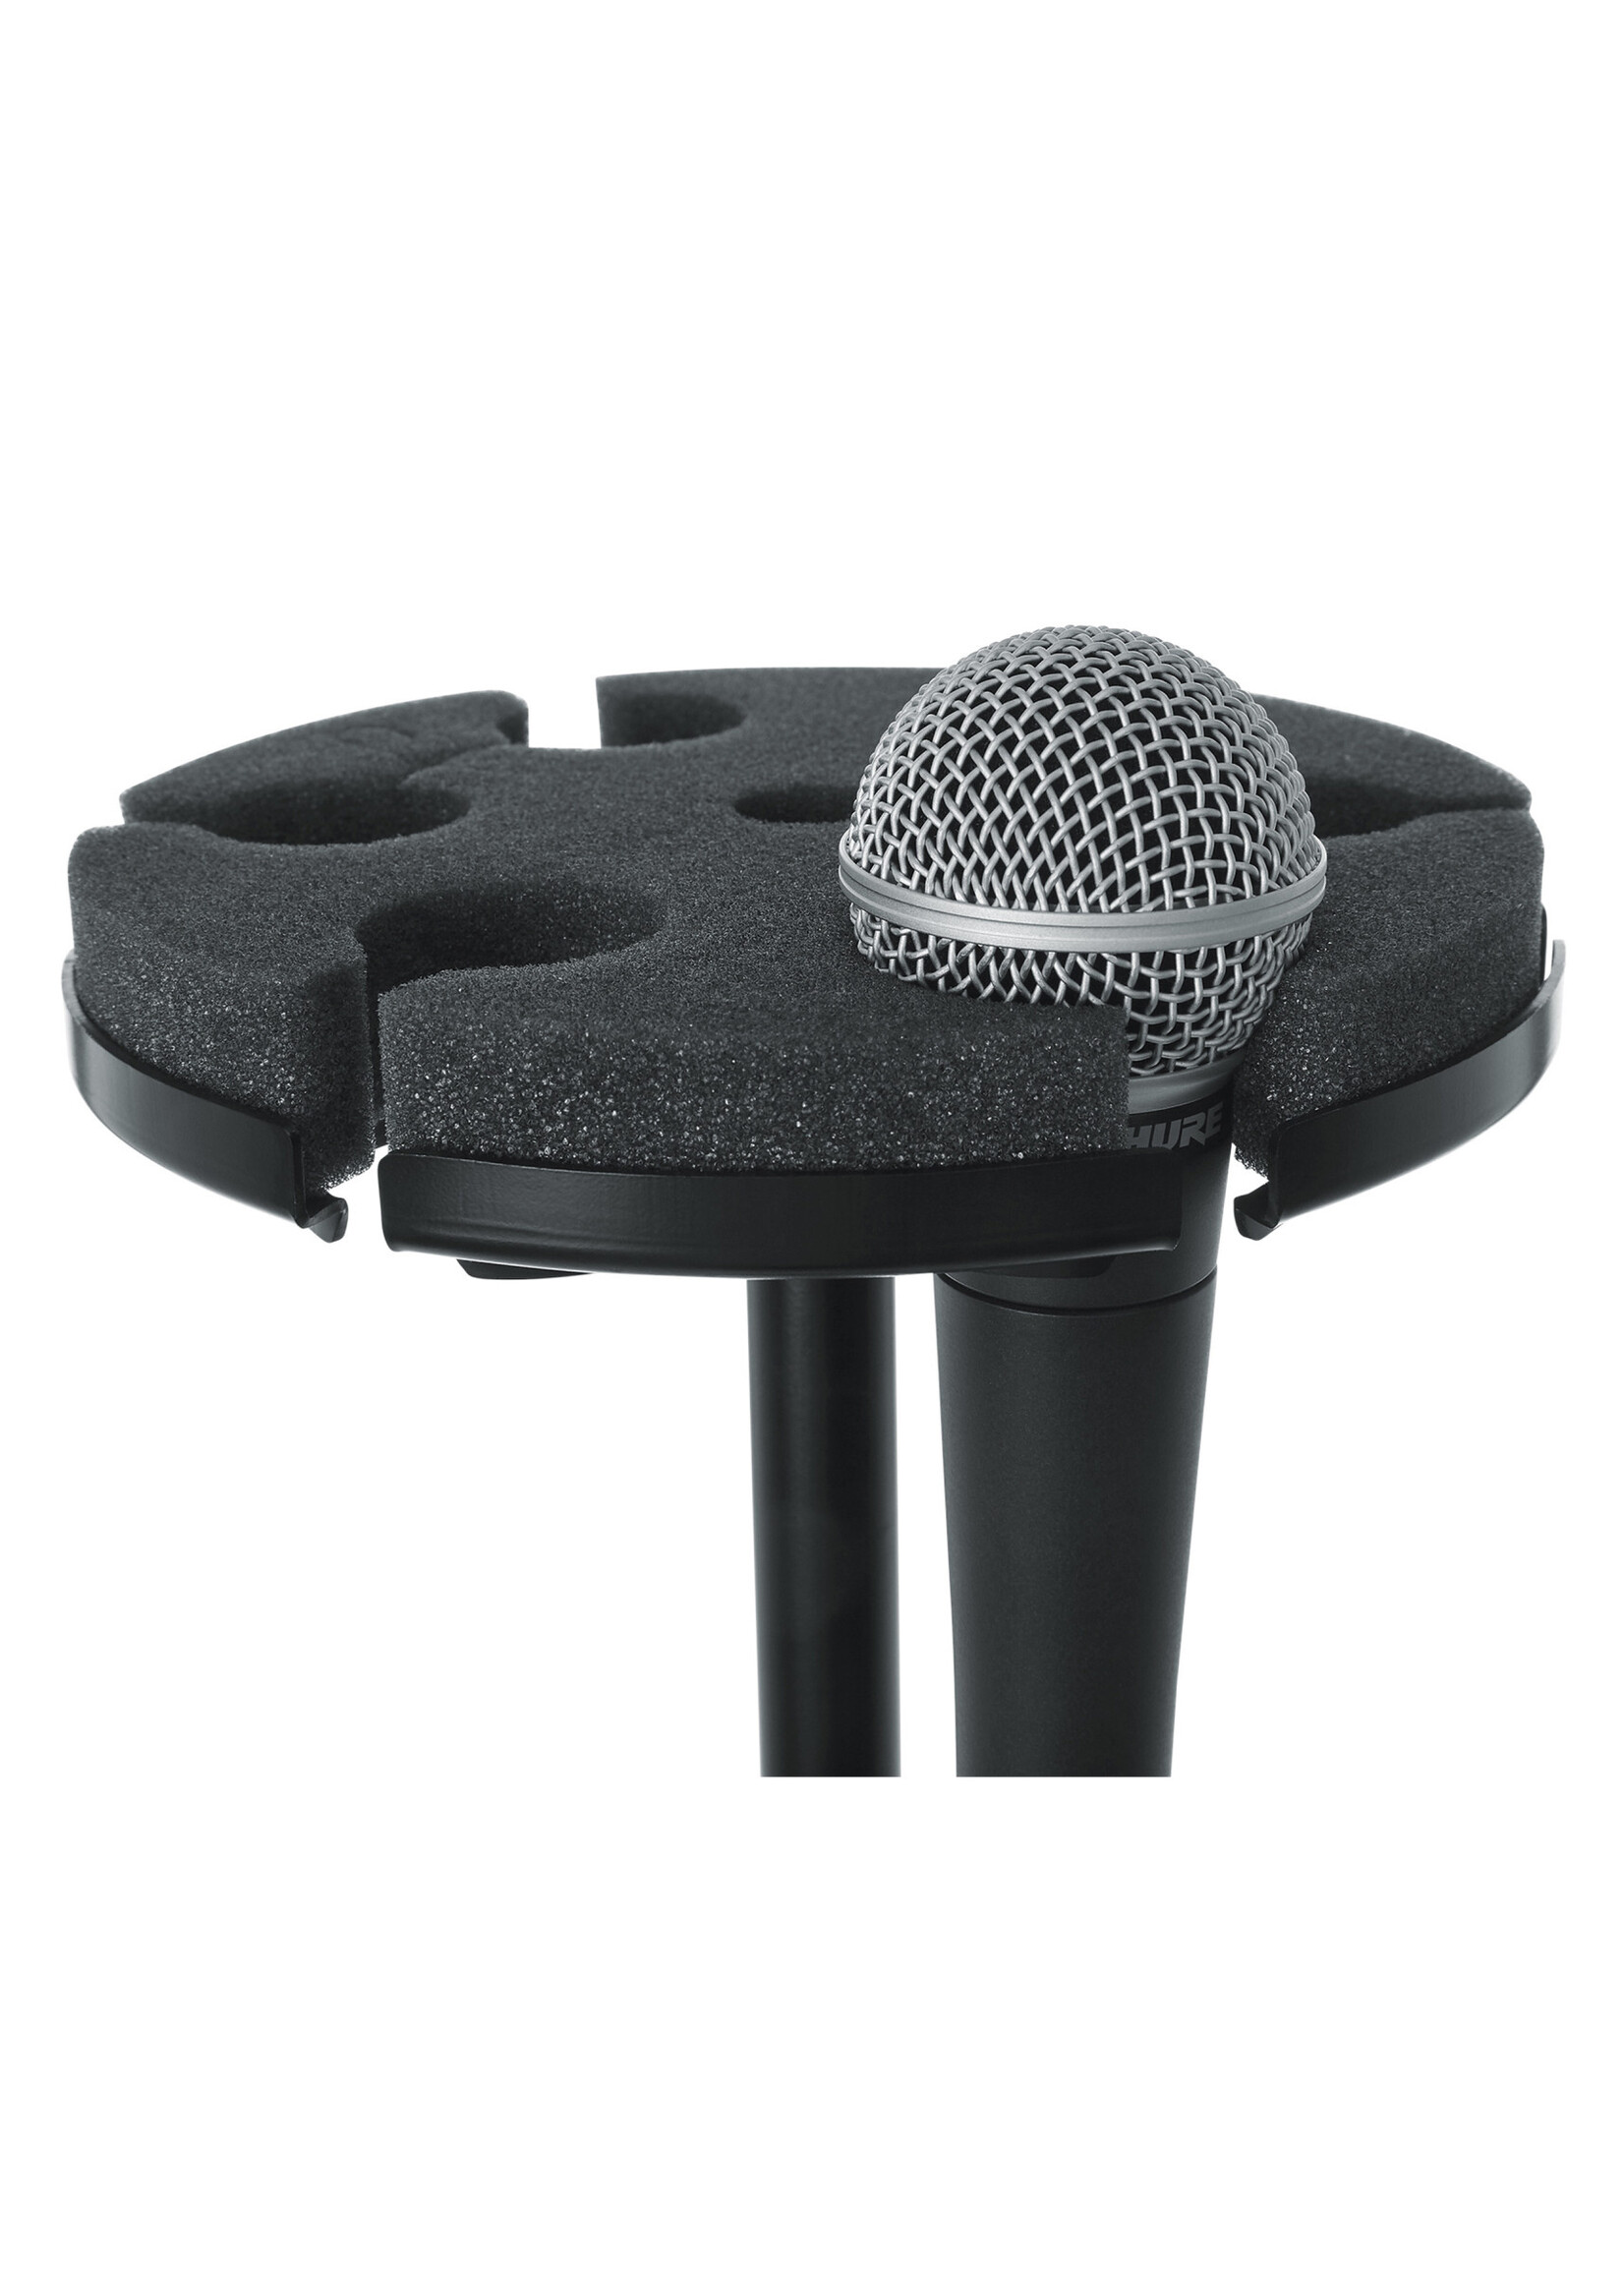 Gator Multi Microphone Tray Designed To Hold 6 Mics